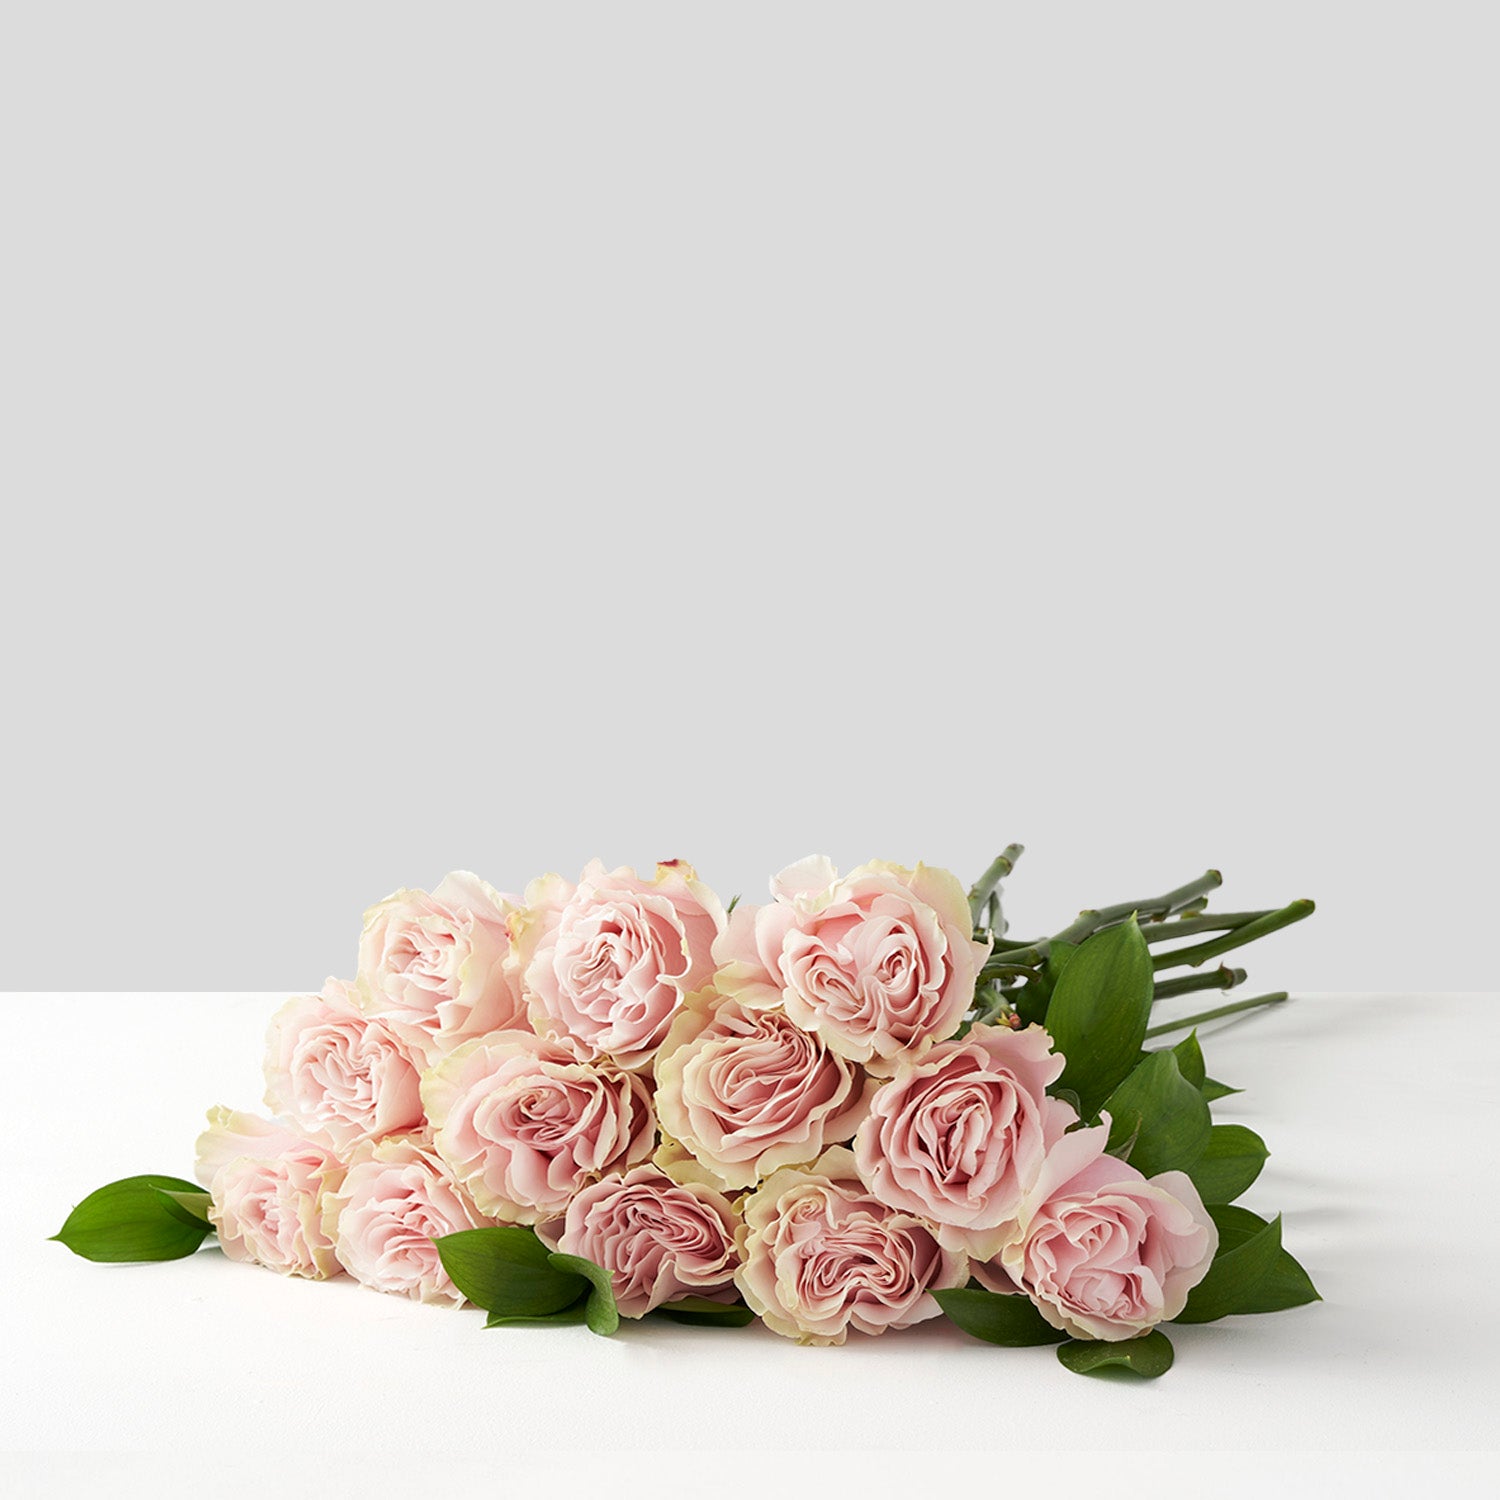 Bouquet of twelve pale pink Mondial roses with greenery on white background.